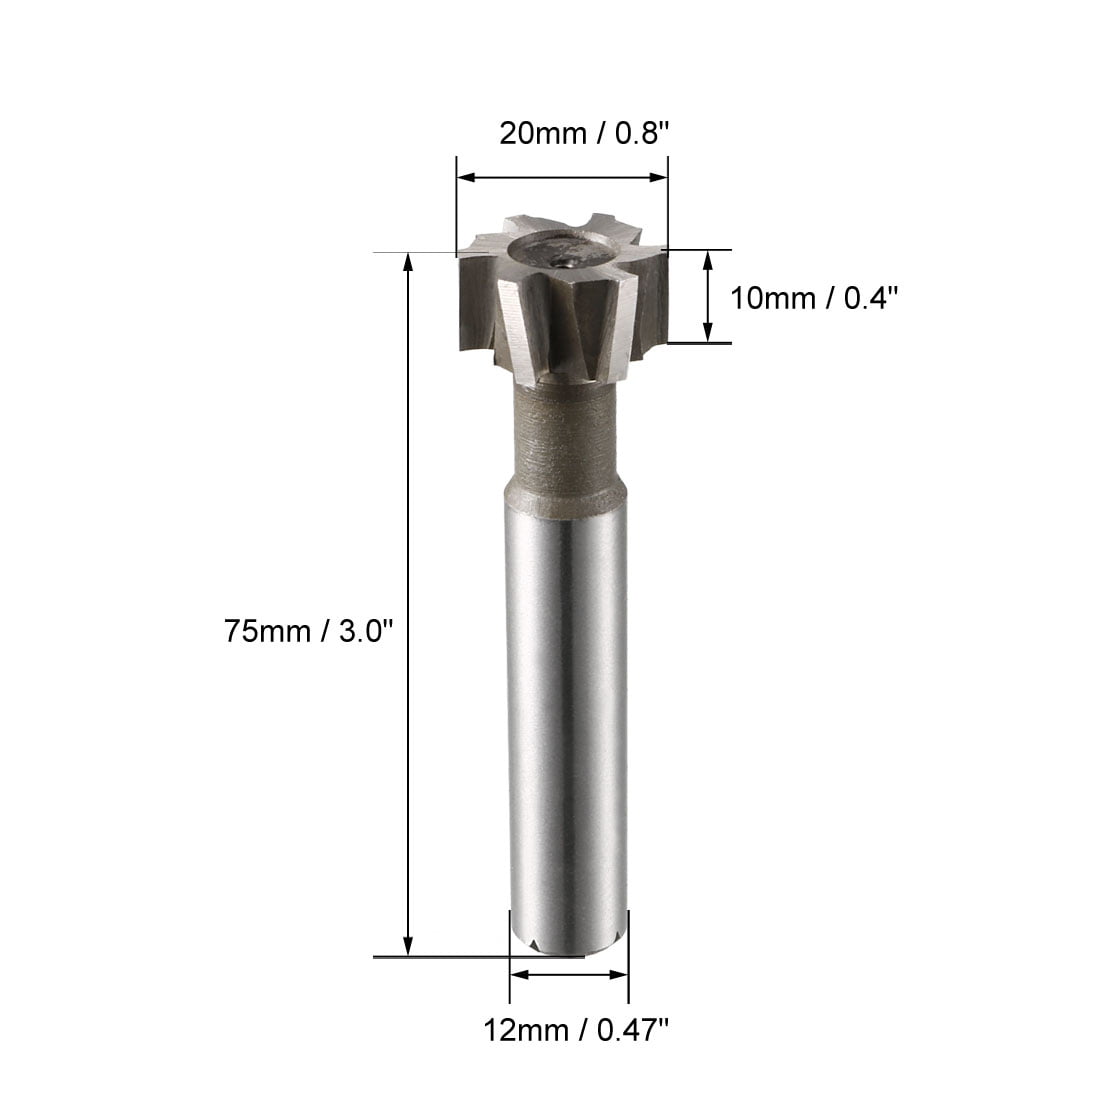 uxcell T-Slot Milling Cutters 10mm Depth 20mm Cutting Dia 12mm Shank Tungsten Carbide Tip 6 Flutes T Slot End Mill for Stainless Steel Copper Aluminum 